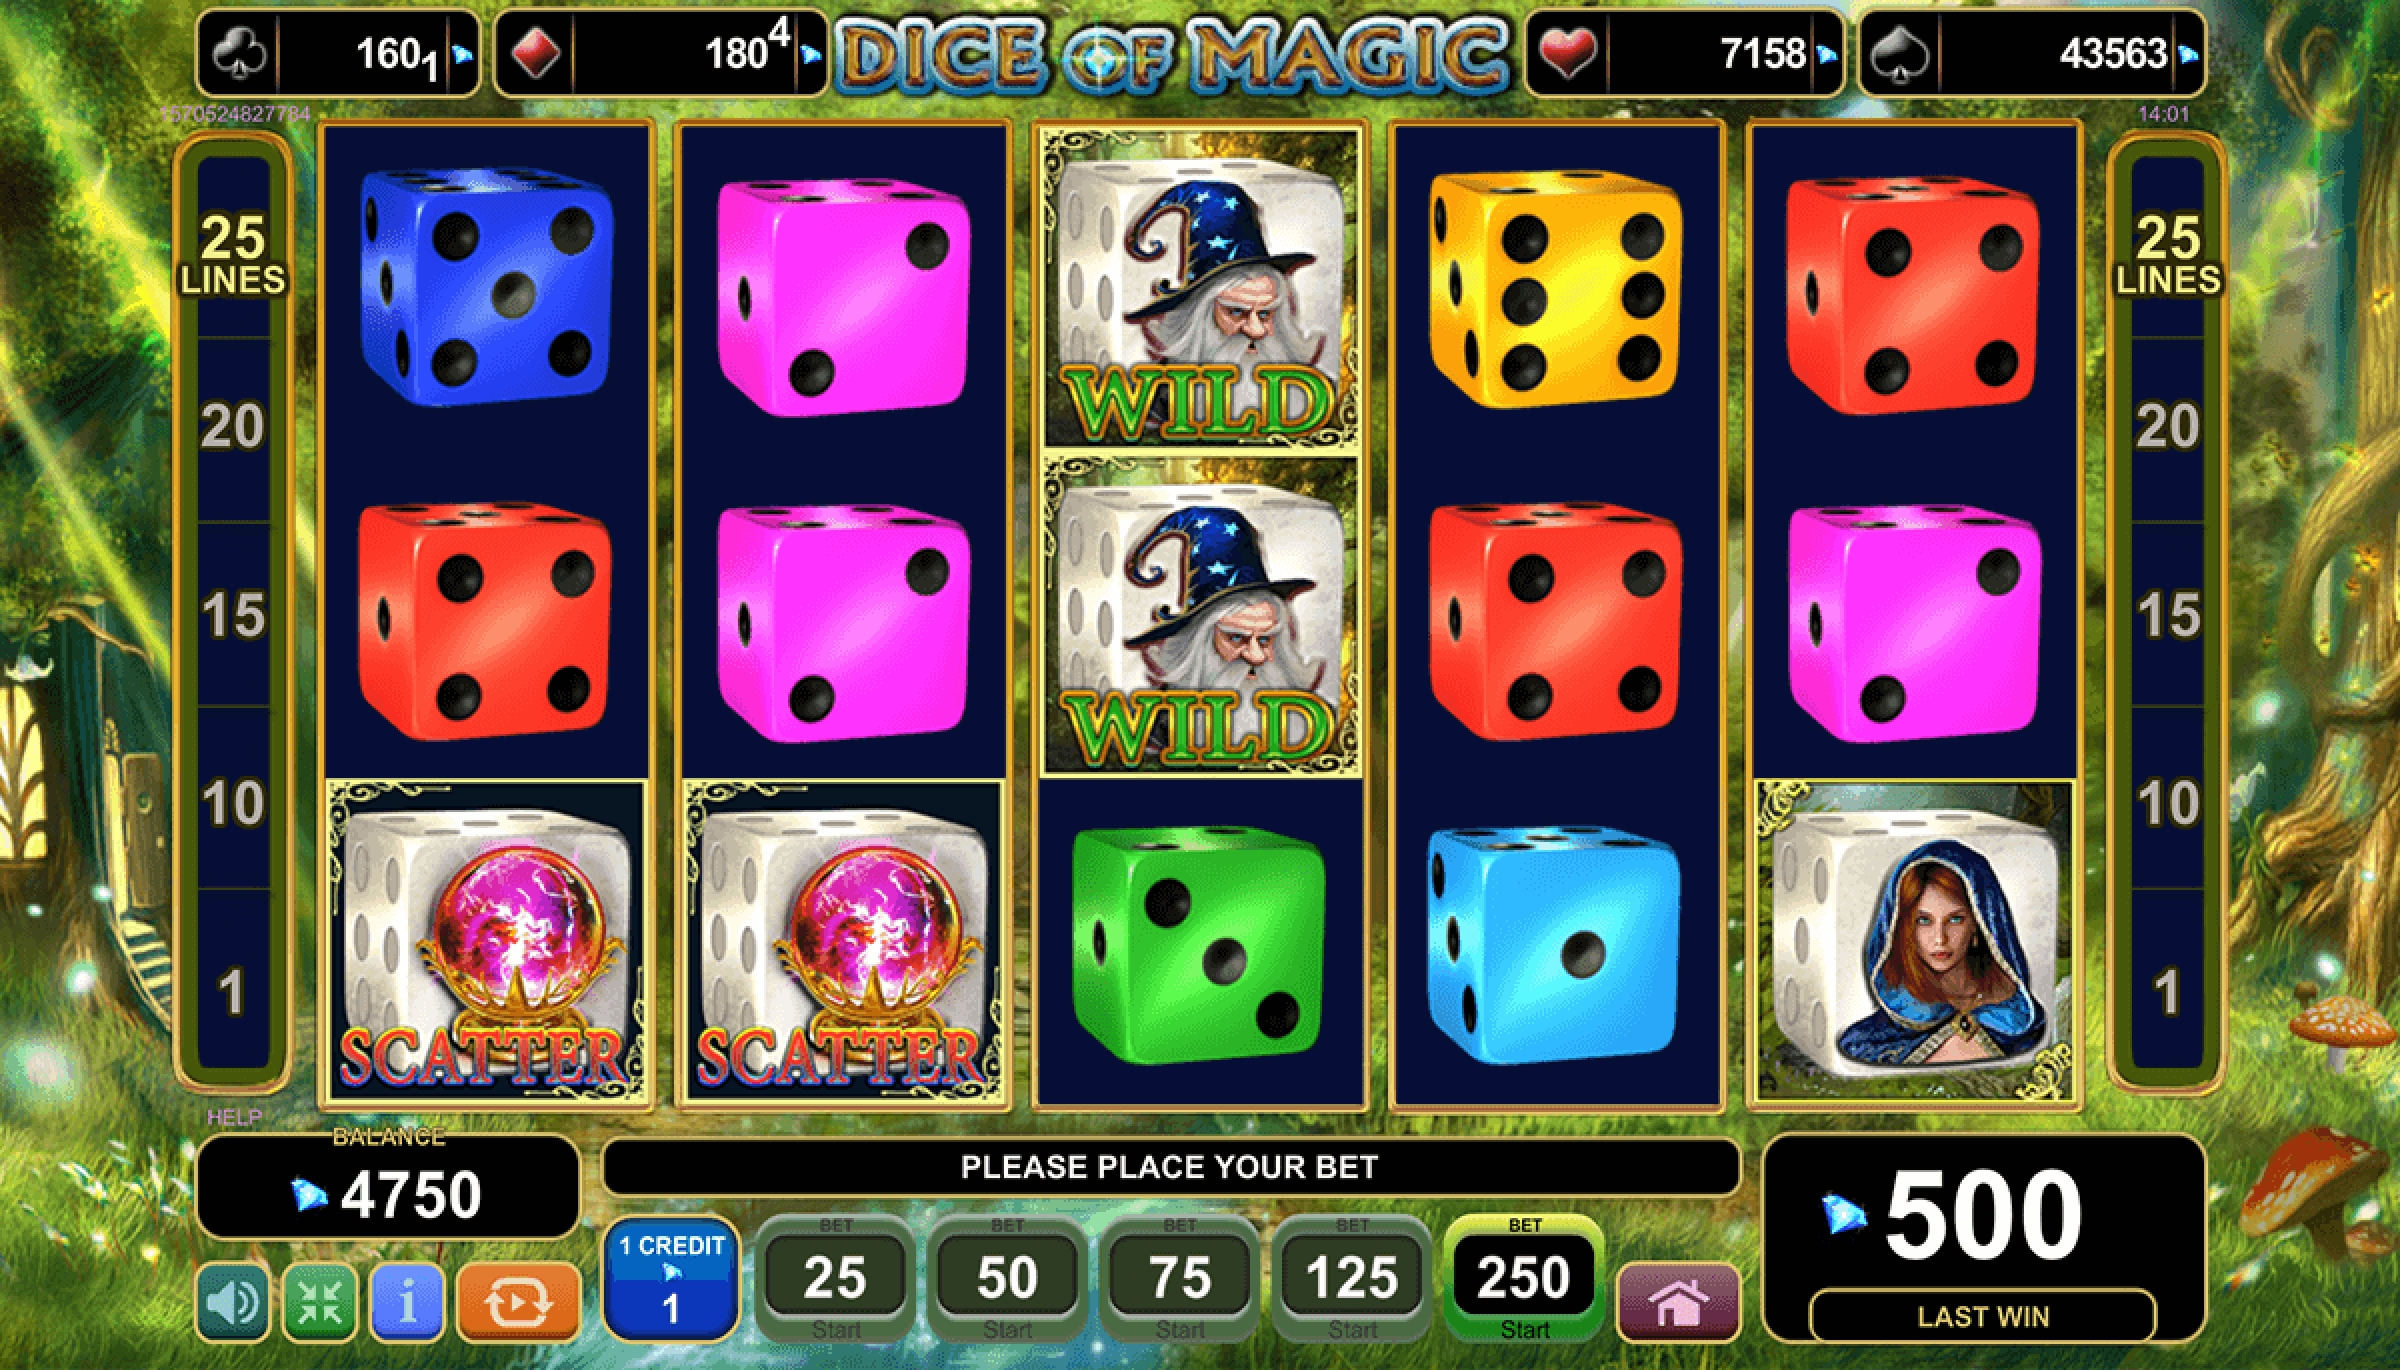 The Dice of Magic Online Slot Demo Game by EGT